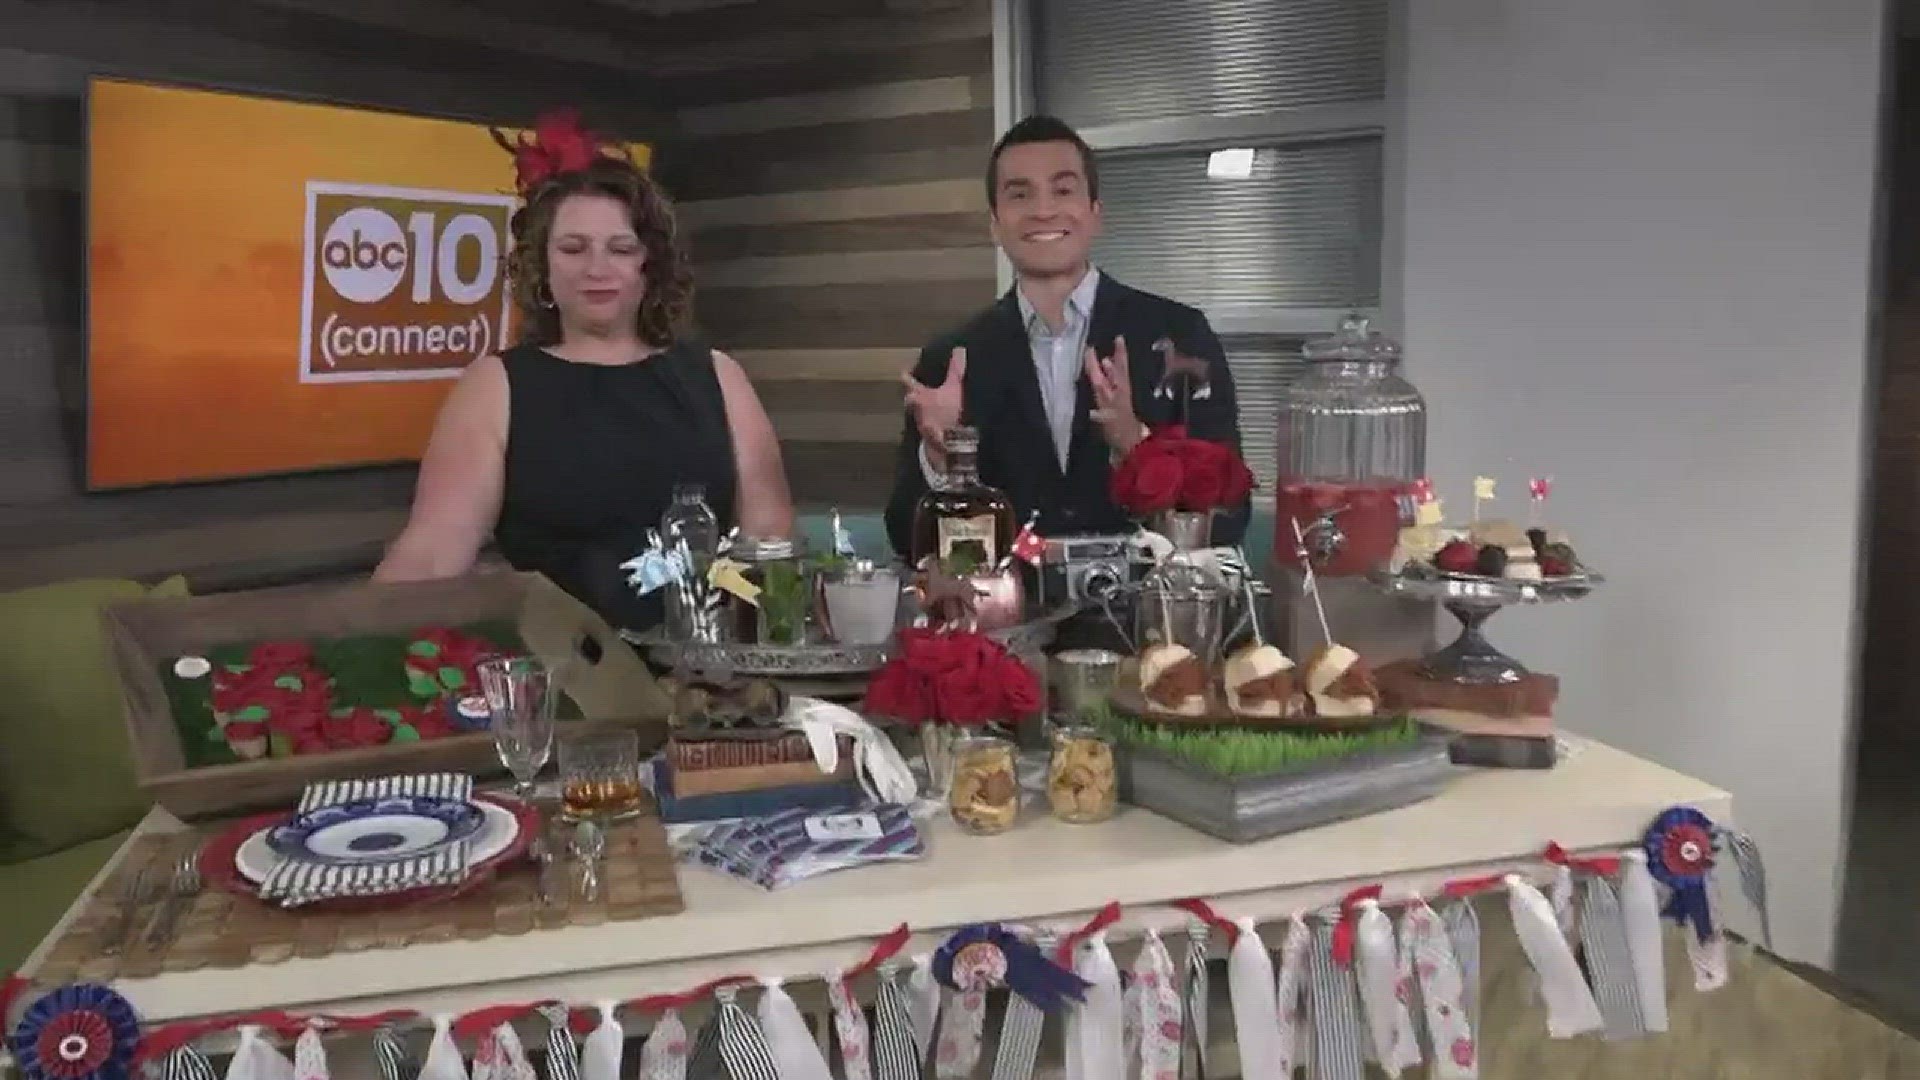 Stacey Dillon from Stacey & Co. shows us some "must haves" if you're planning on throwing a Kentucky Derby-Themed party!